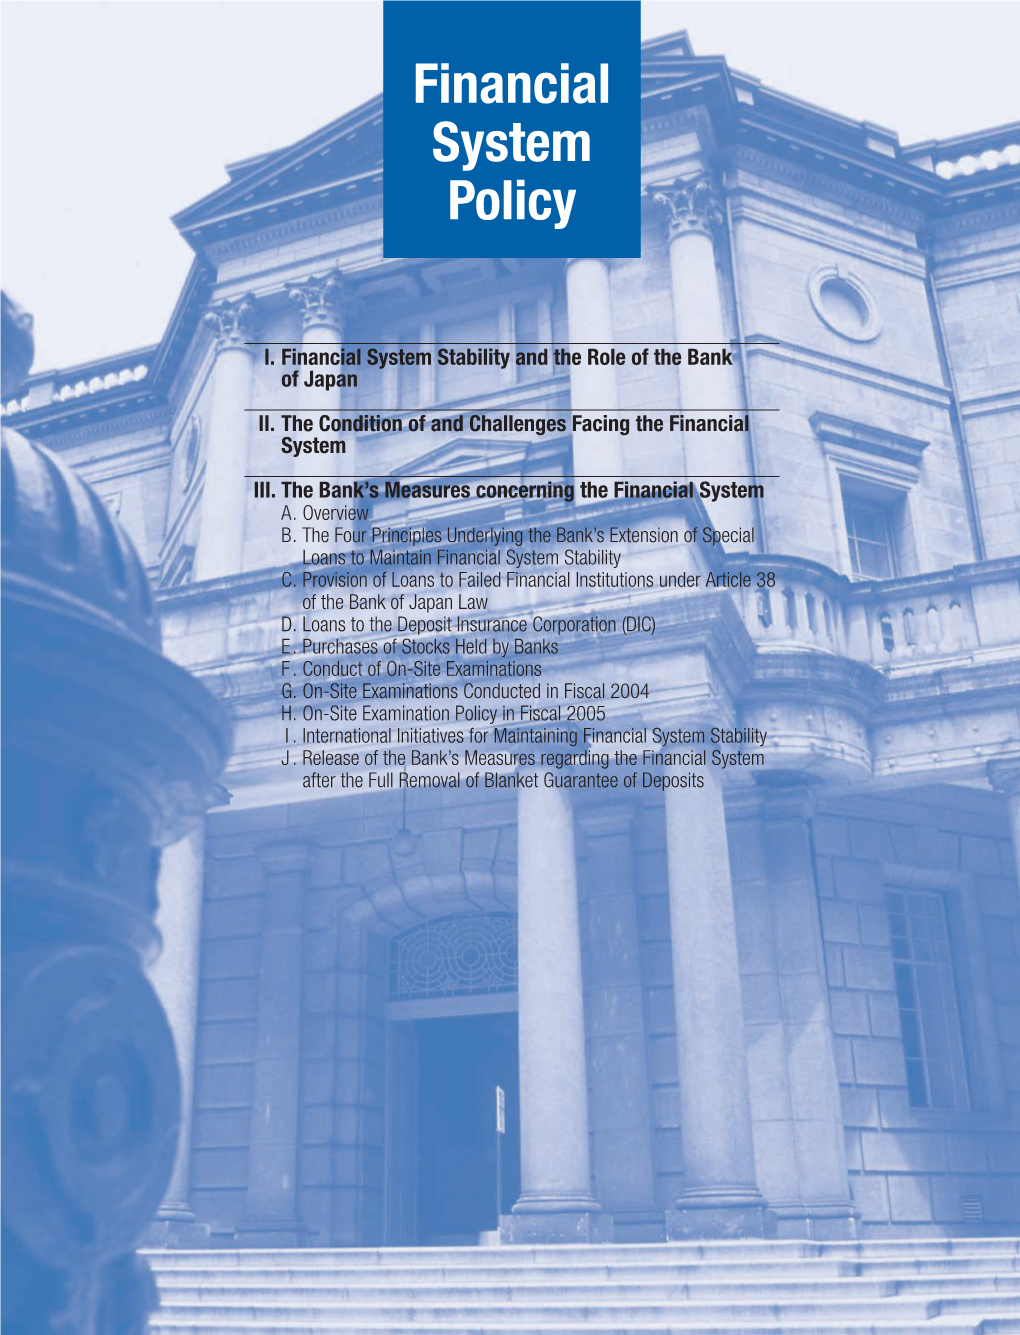 Annual Review 2005 054 Financial System Policy